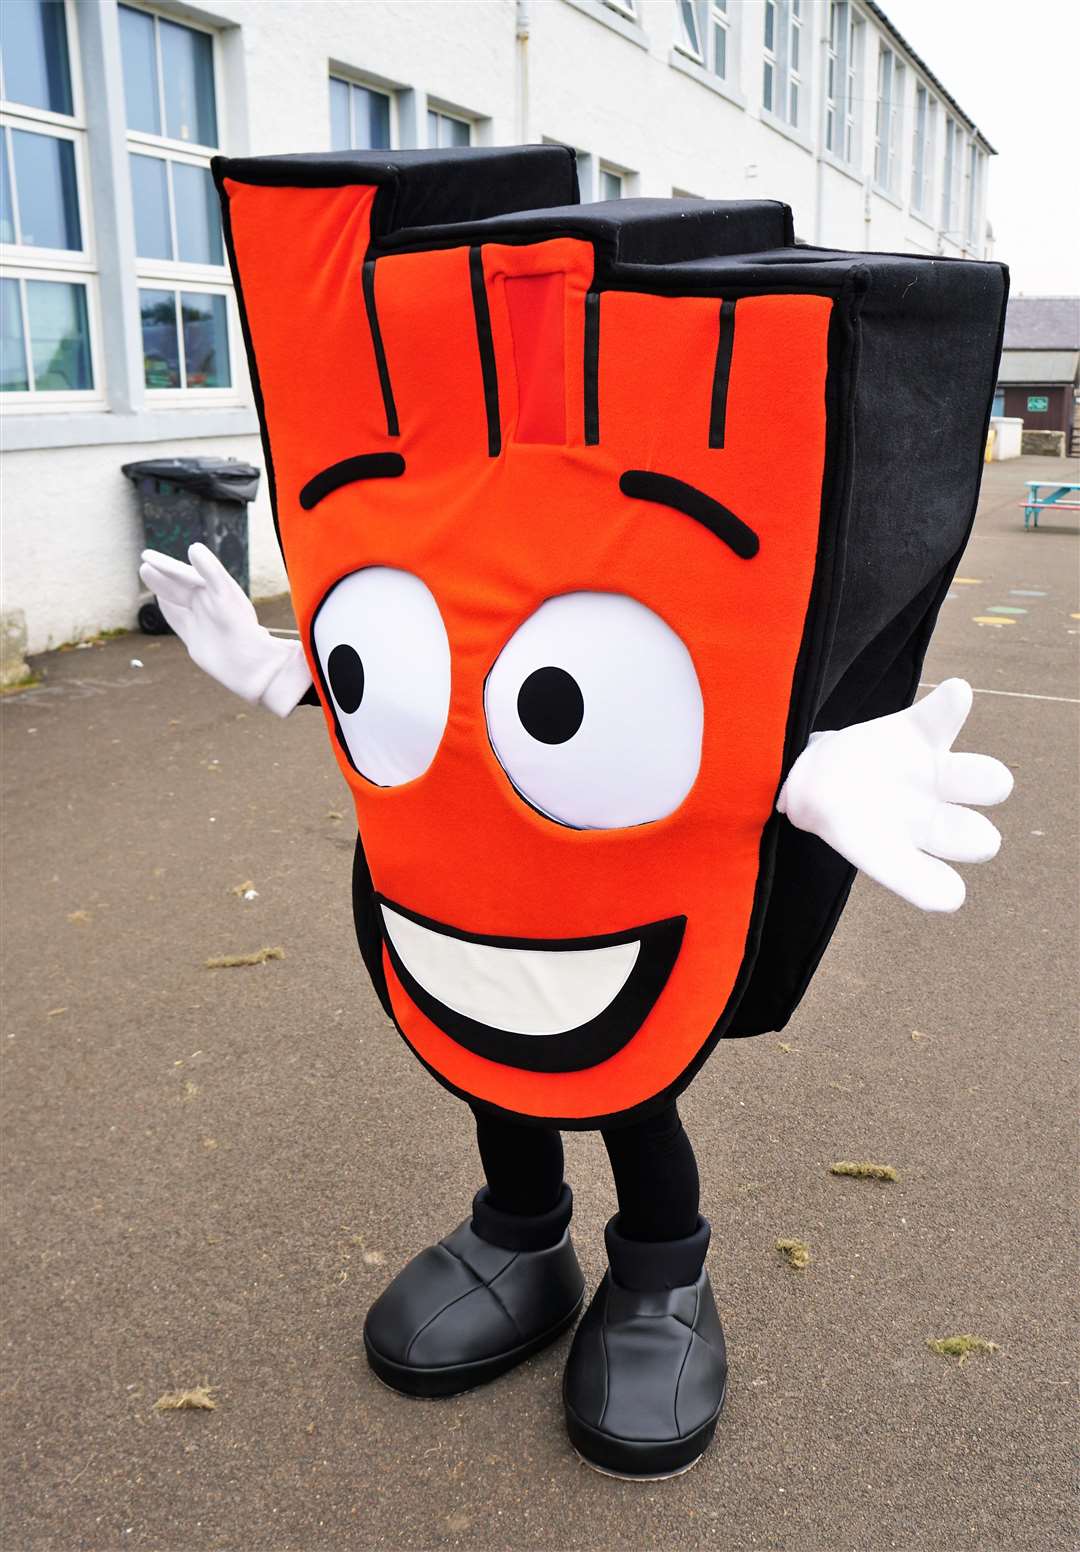 Strider the WOW mascot entertained the children and informed them of healthy activities.